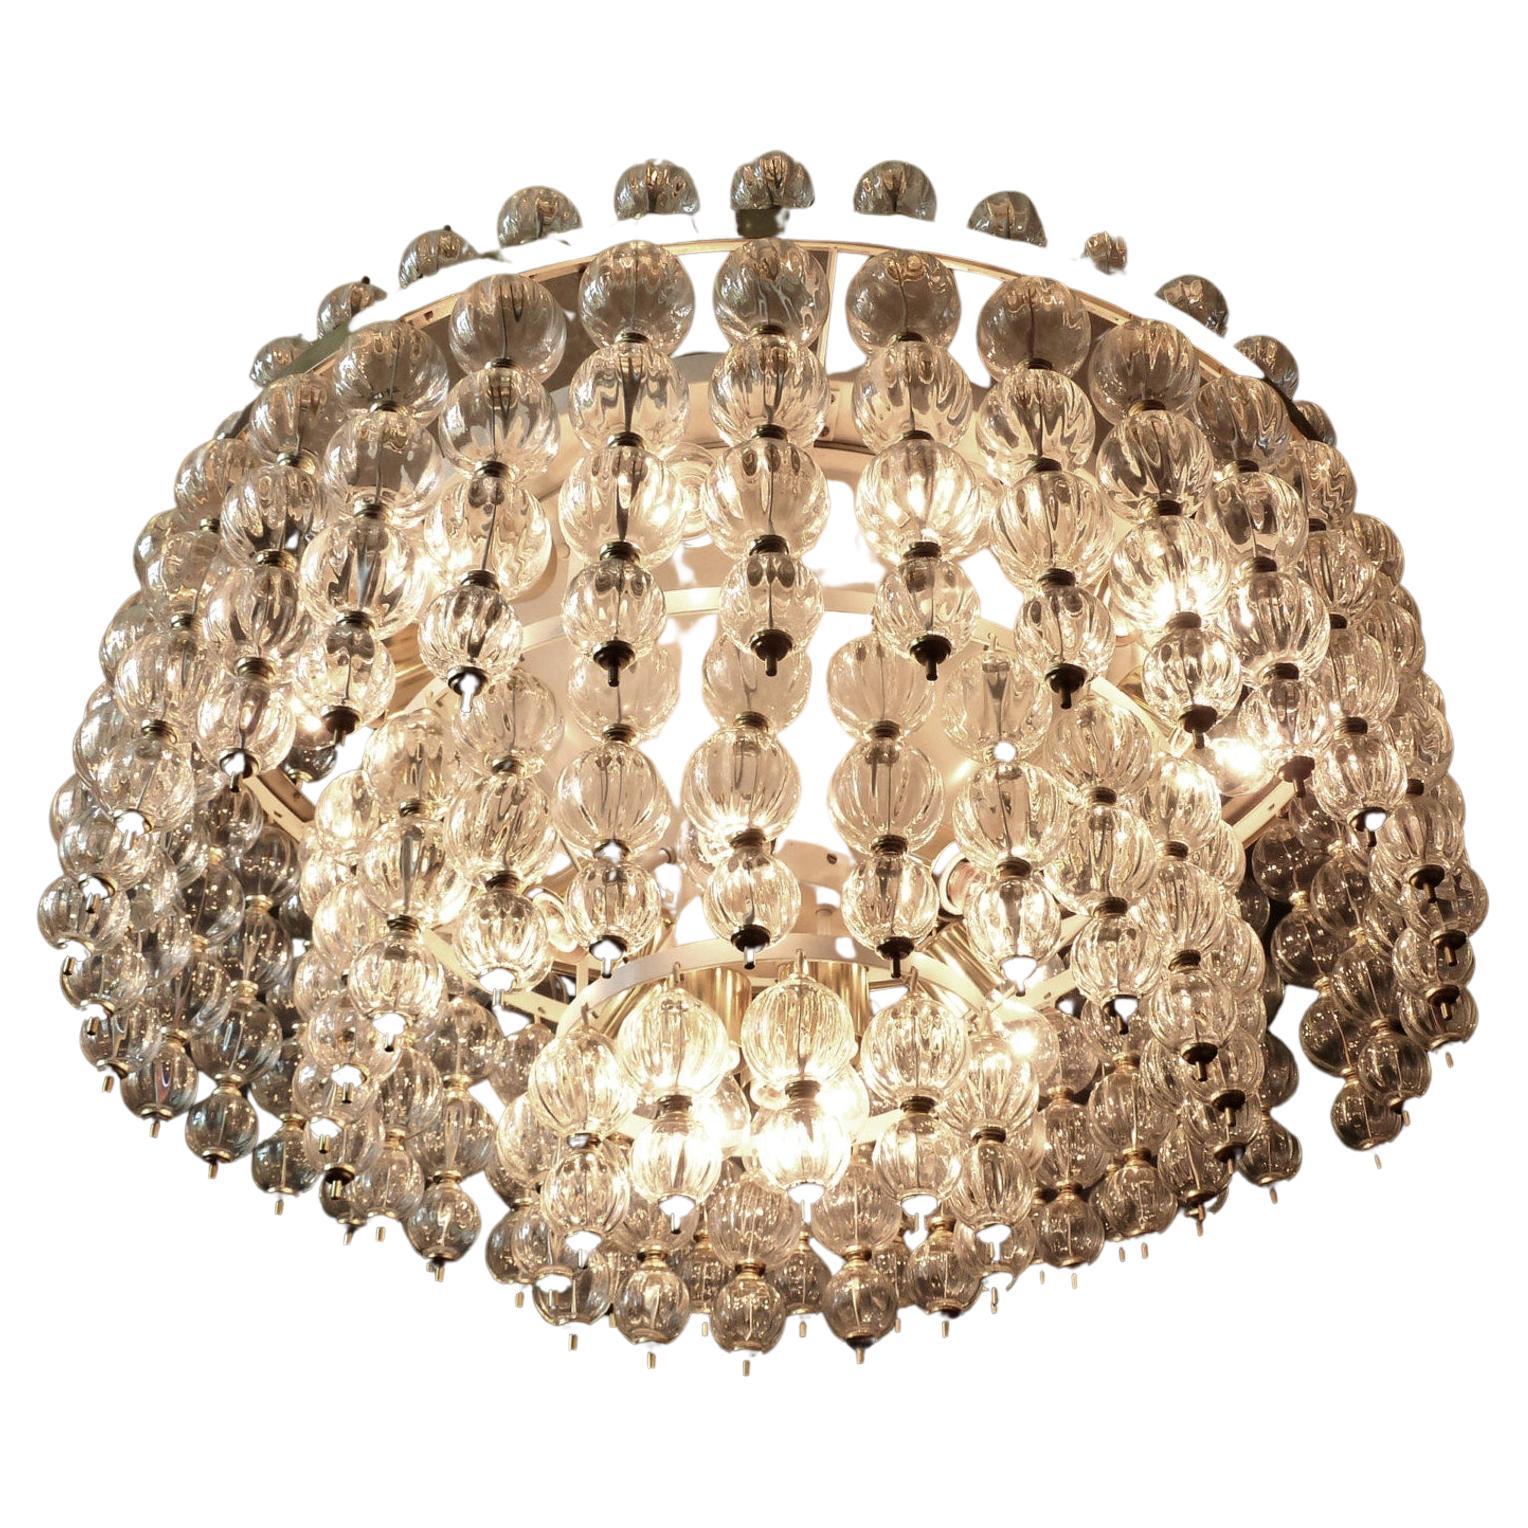 Monumental Hand-Blown Glass Opera or Cinema Chandelier, Germany, 1950s For Sale